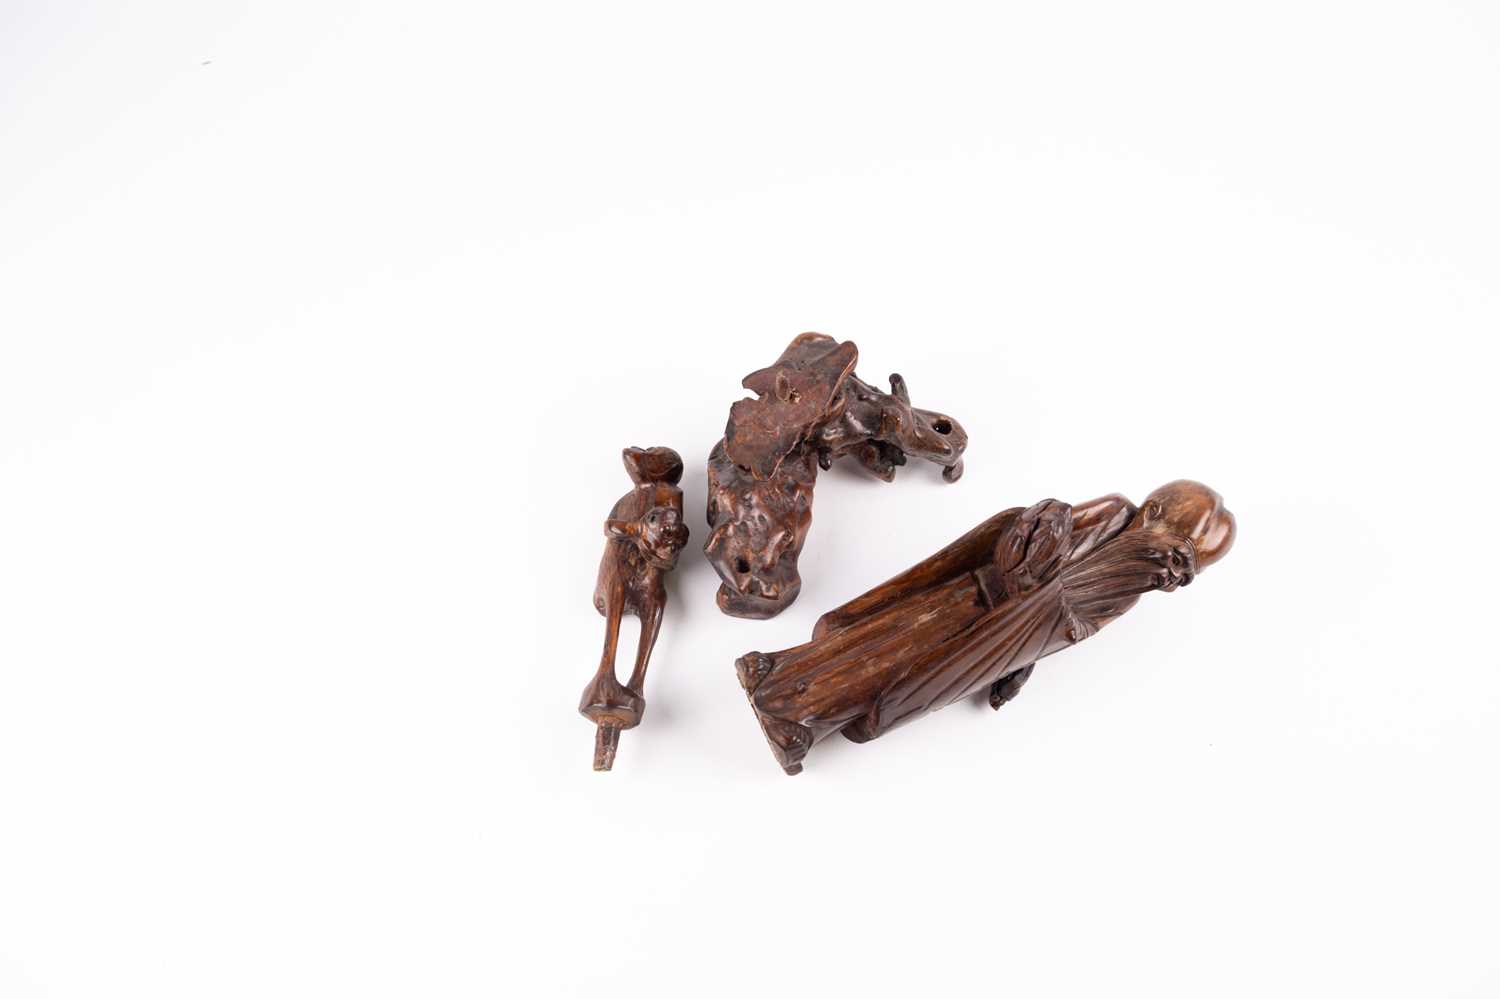 A Chinese carved wood figure of Shoulao and a Monkey, Qing, 中国, 寿老与猴木雕像一件，清代，18世纪 18th century, - Image 2 of 4